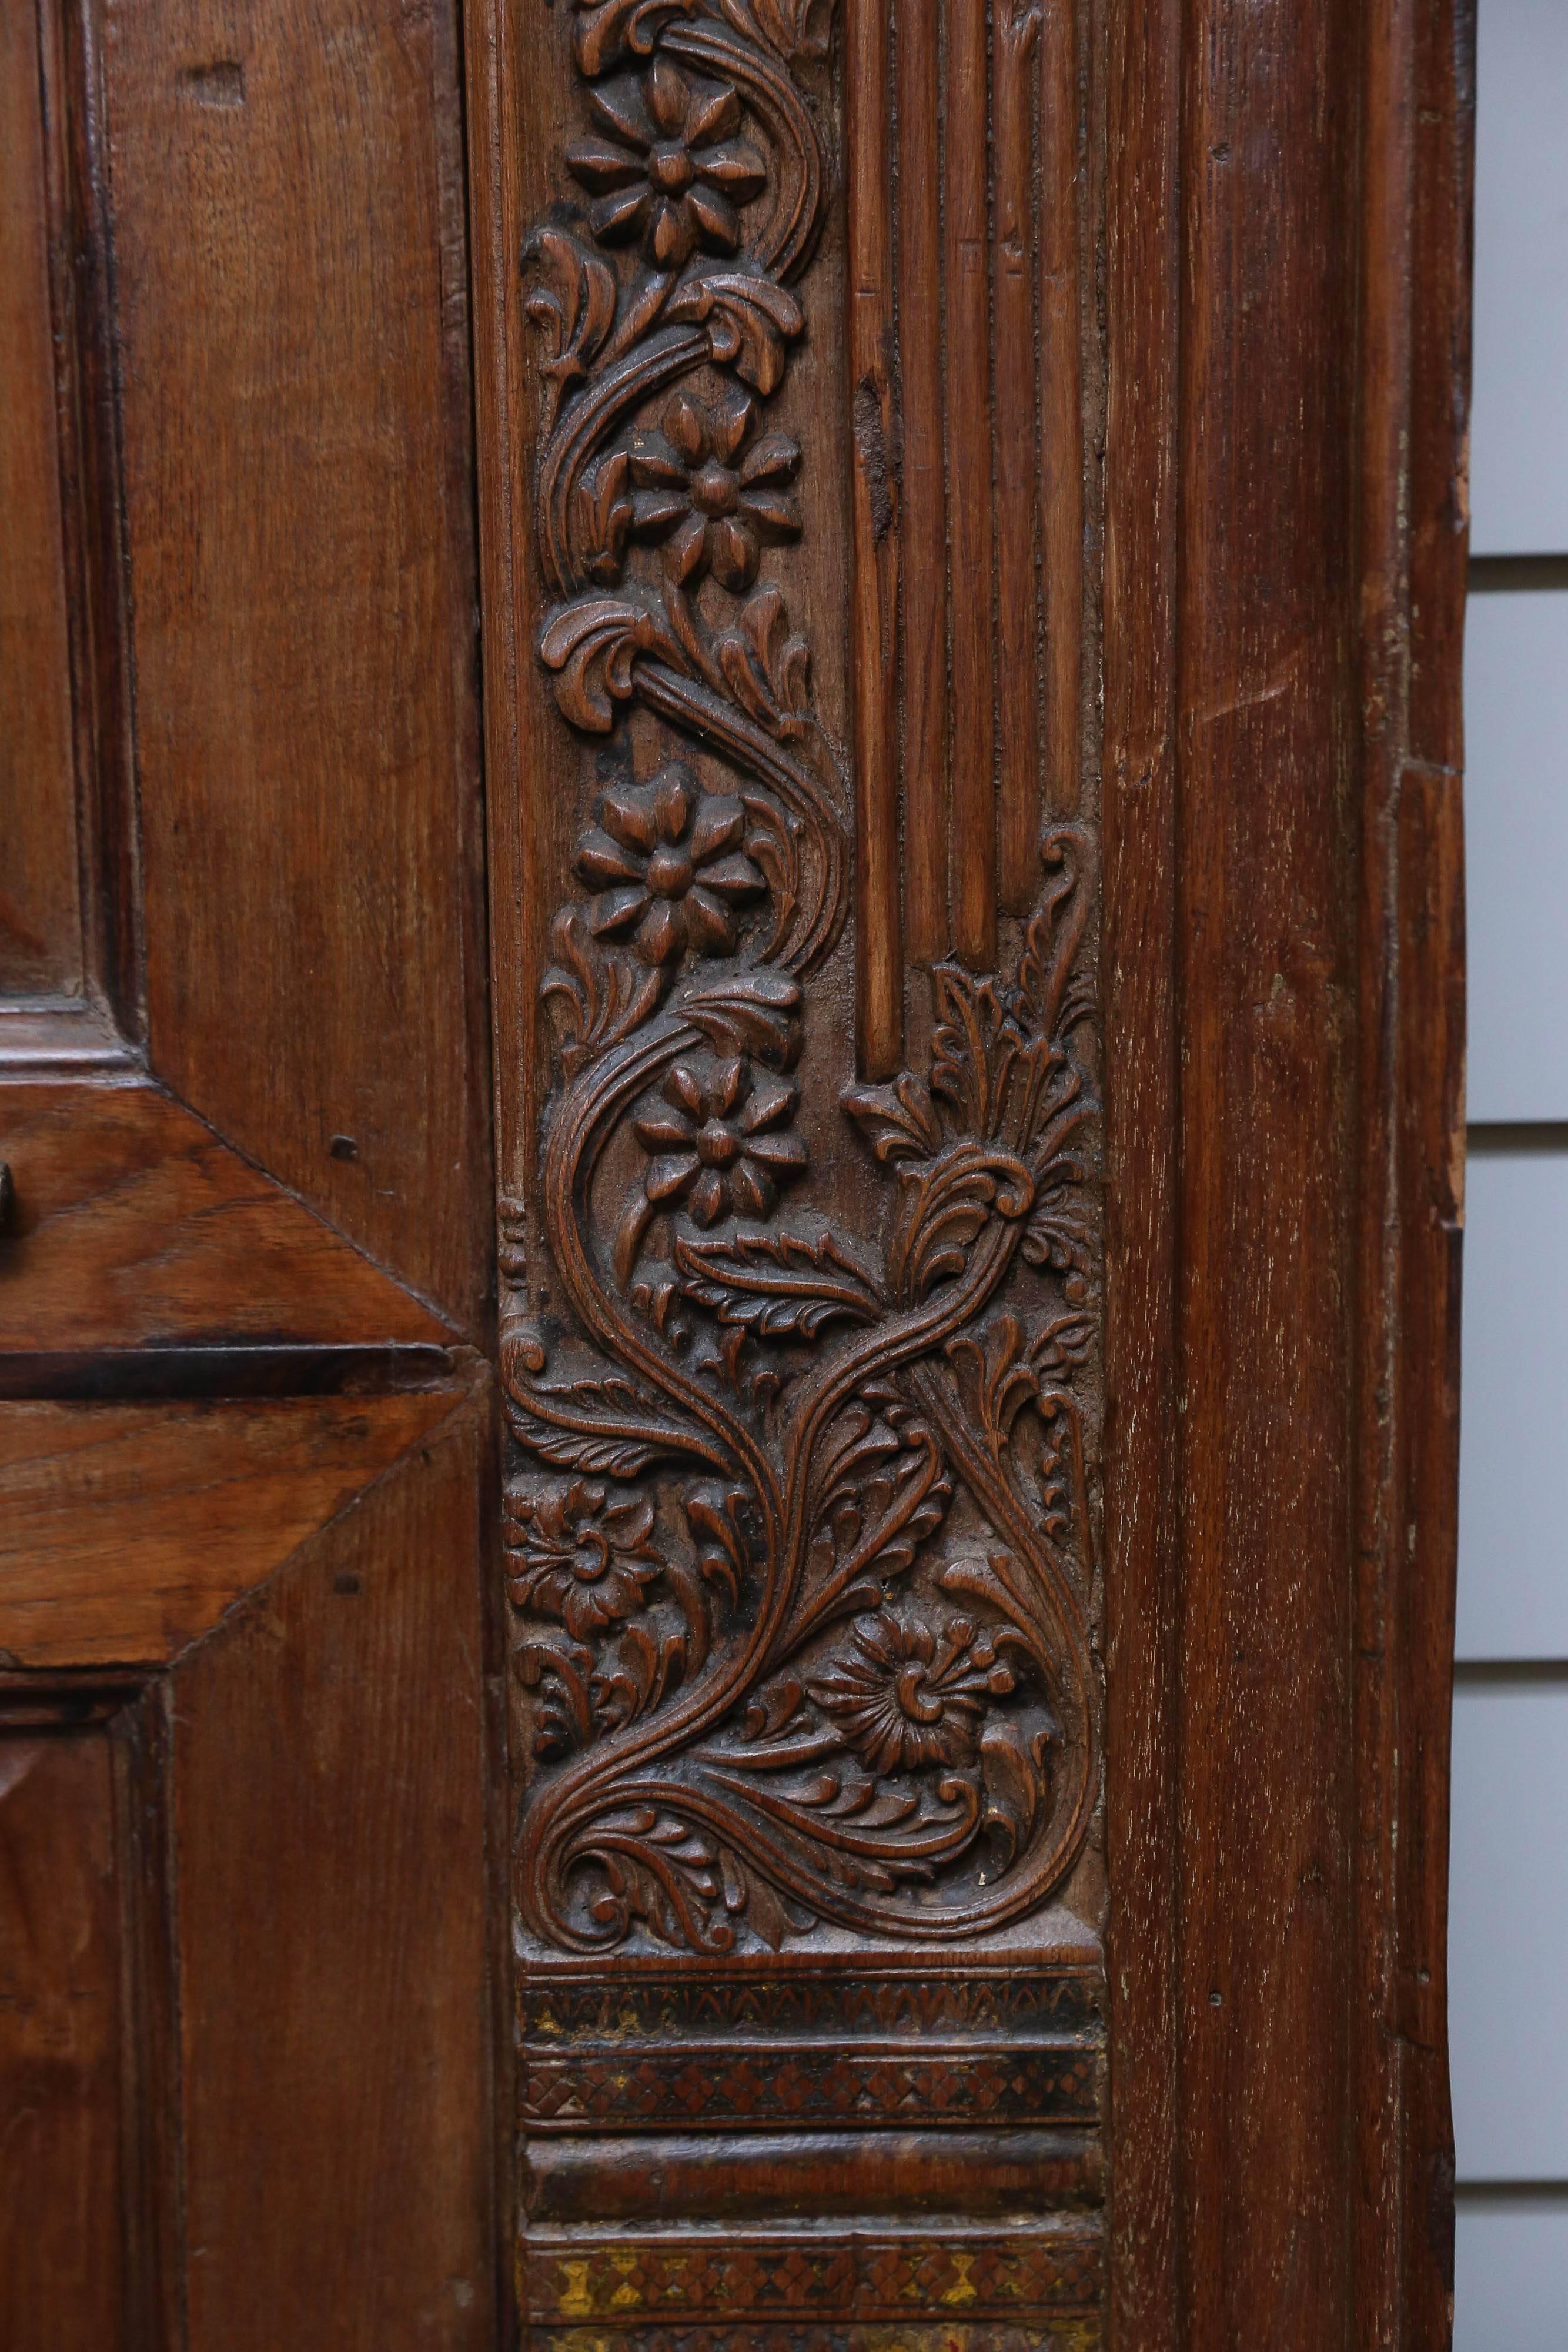 Third Quarter of the 19th Century Solid Teak Wood Superbly Crafted Entry Door For Sale 1